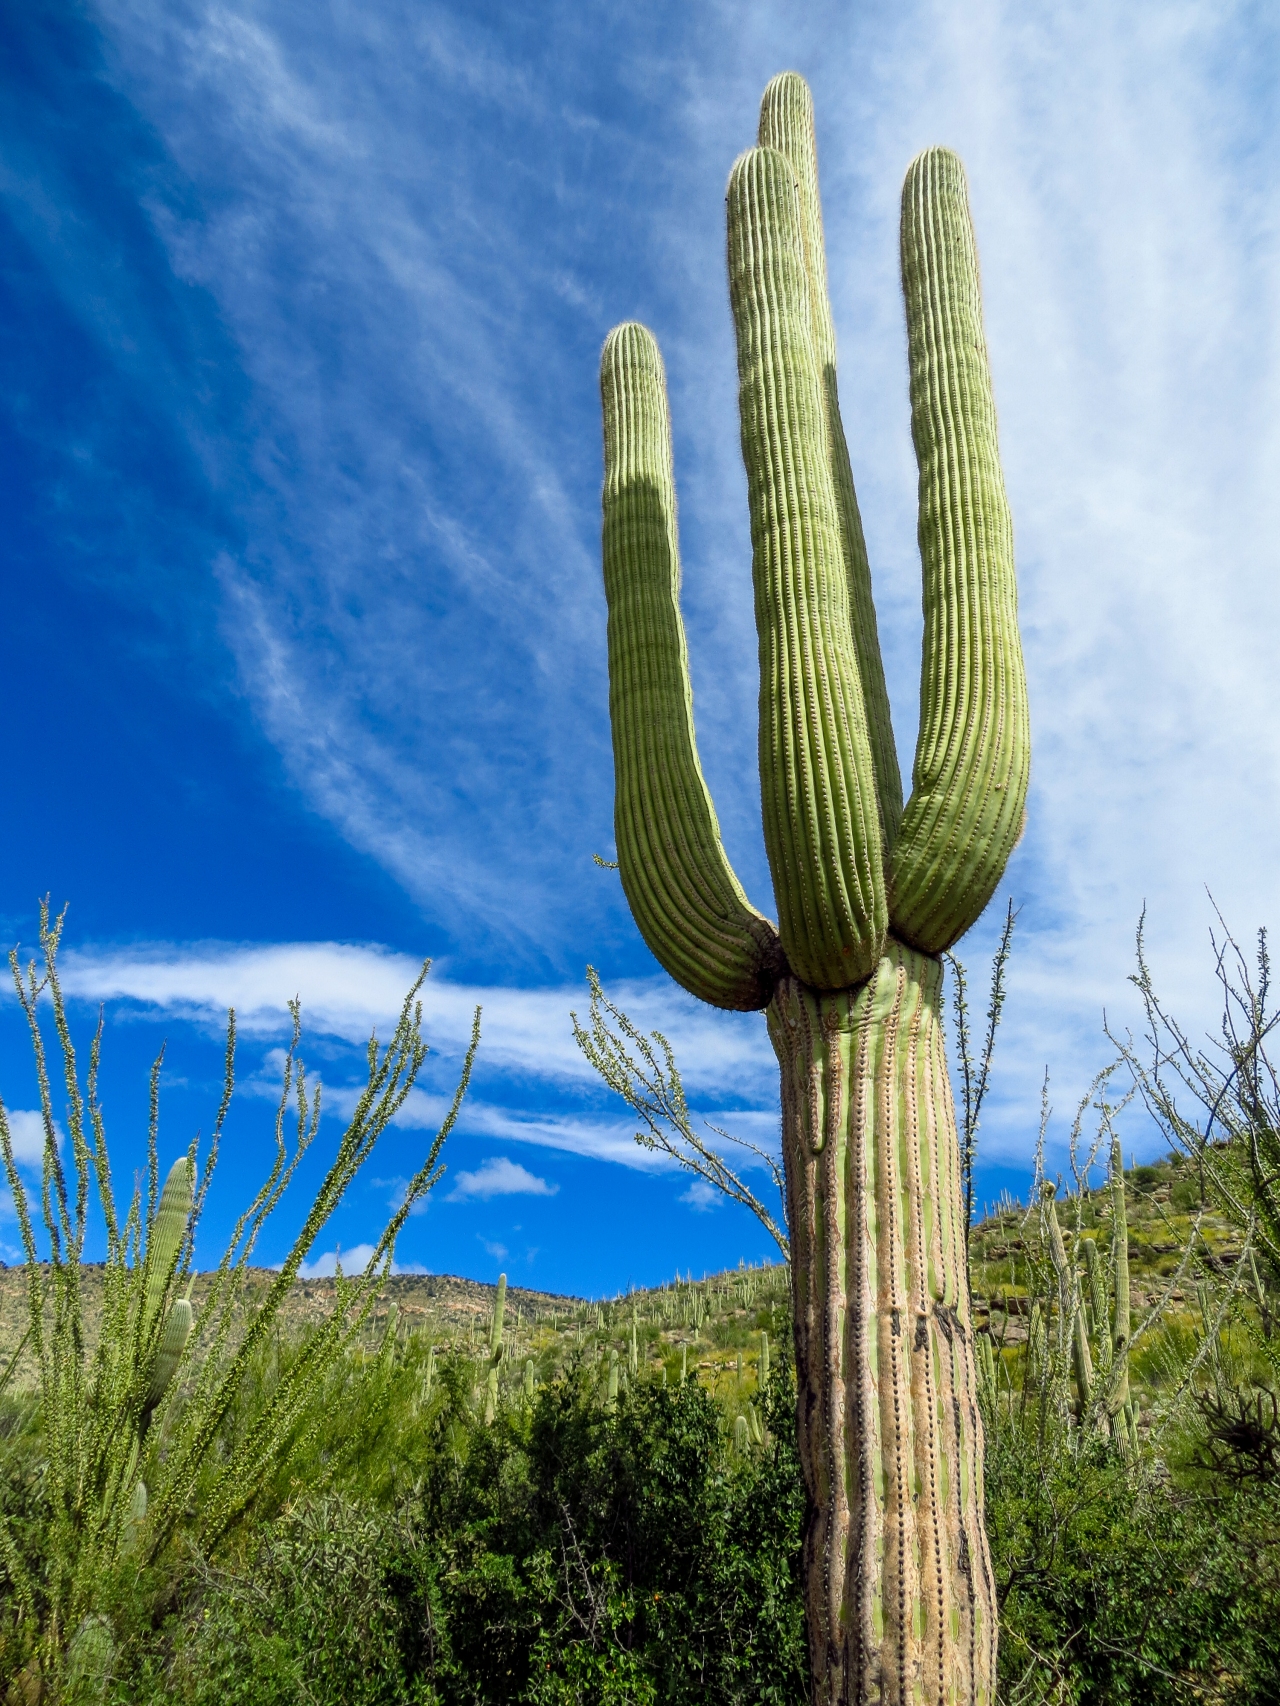 Saguaro: On Deserts, Water and the American West.